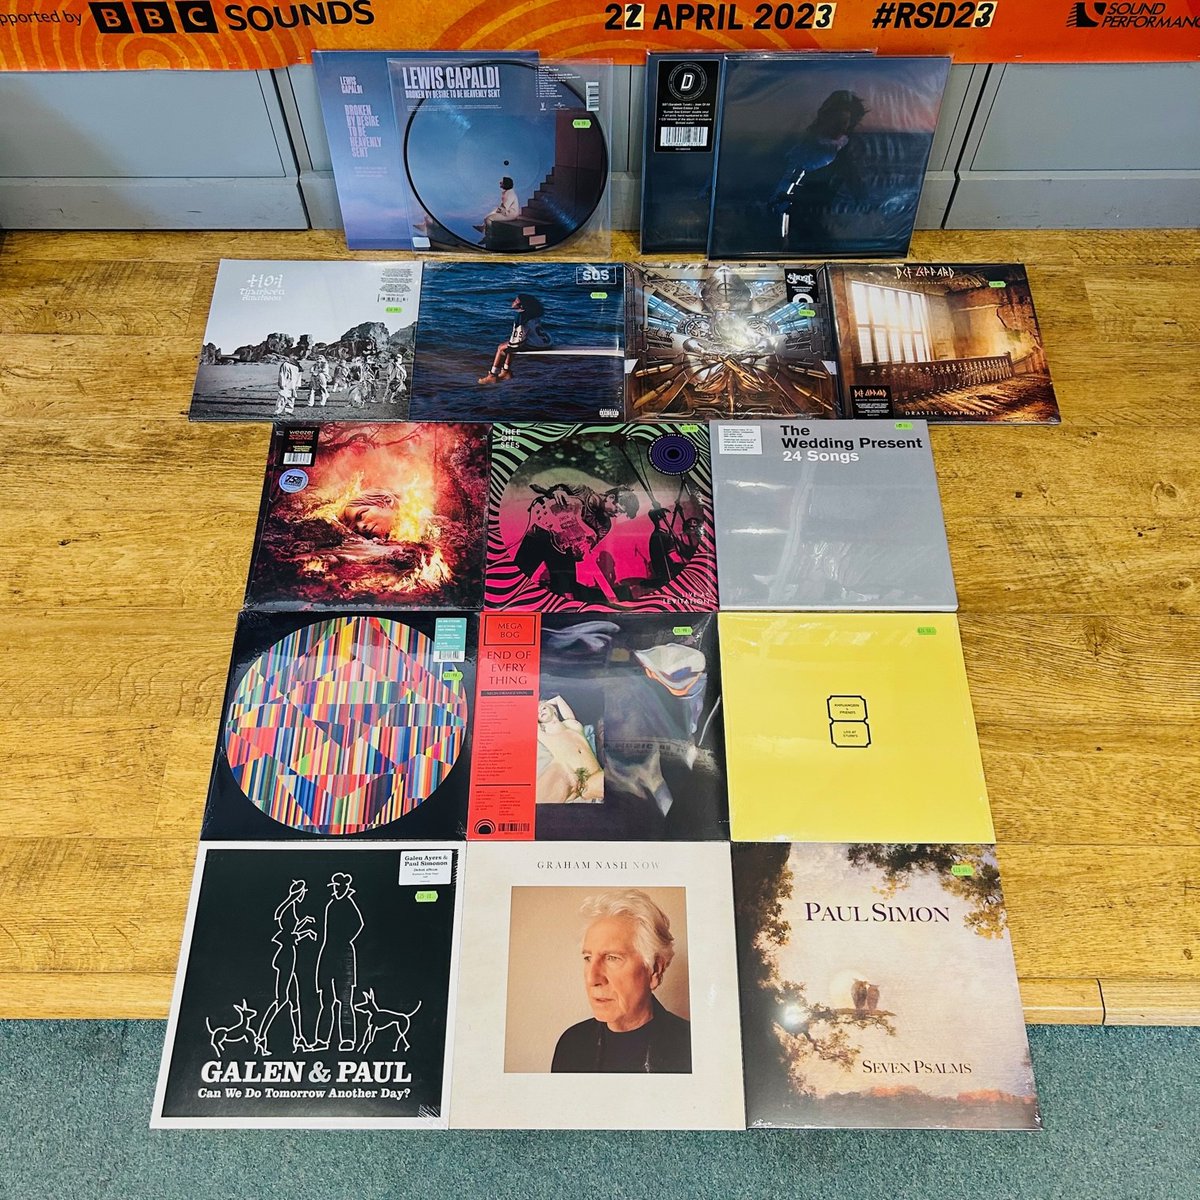 #NewMusicFriday New albums from @LewisCapaldi, @DefLeppard, @sza, @thebandGHOST, @mega_bog,  Graham Nash, Paul Simon and Paul Simonon plus the acclaimed 'Joan Of All' from upcoming guest @sarabethtucek (last few @dinkededition LPs left), @Khruangbin live and more #WaxUpdate